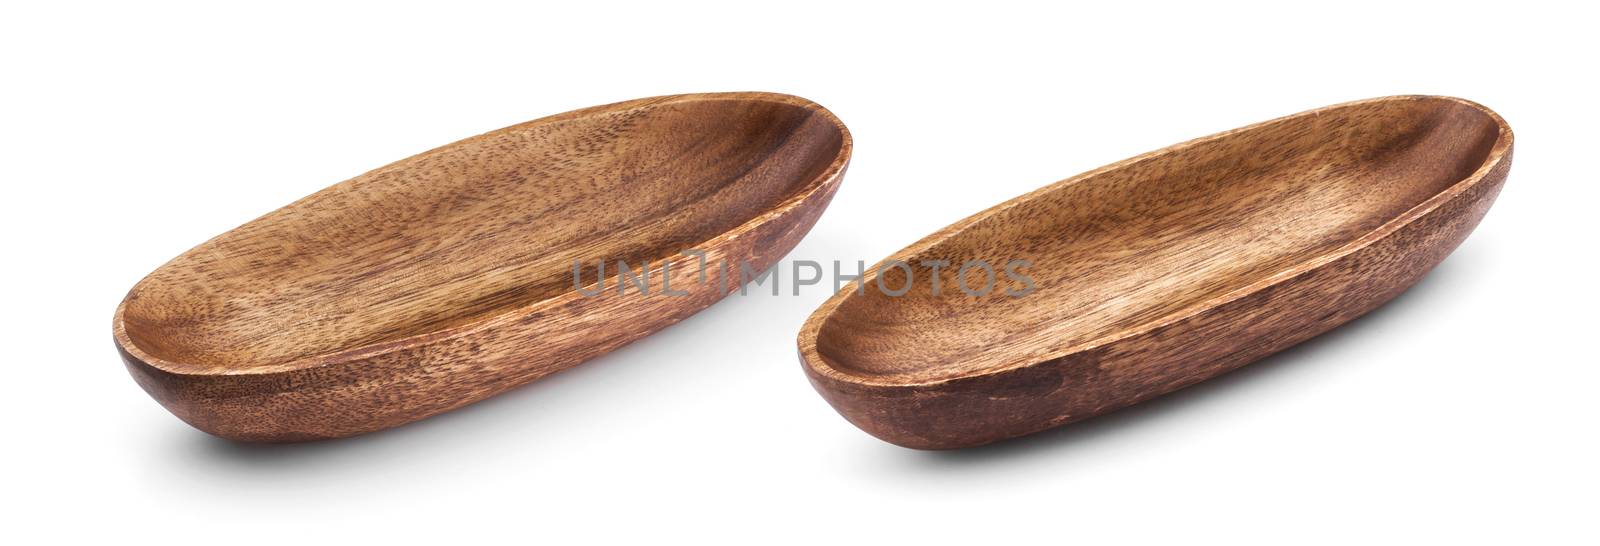 Empty wooden bowl isolated on white background by xamtiw